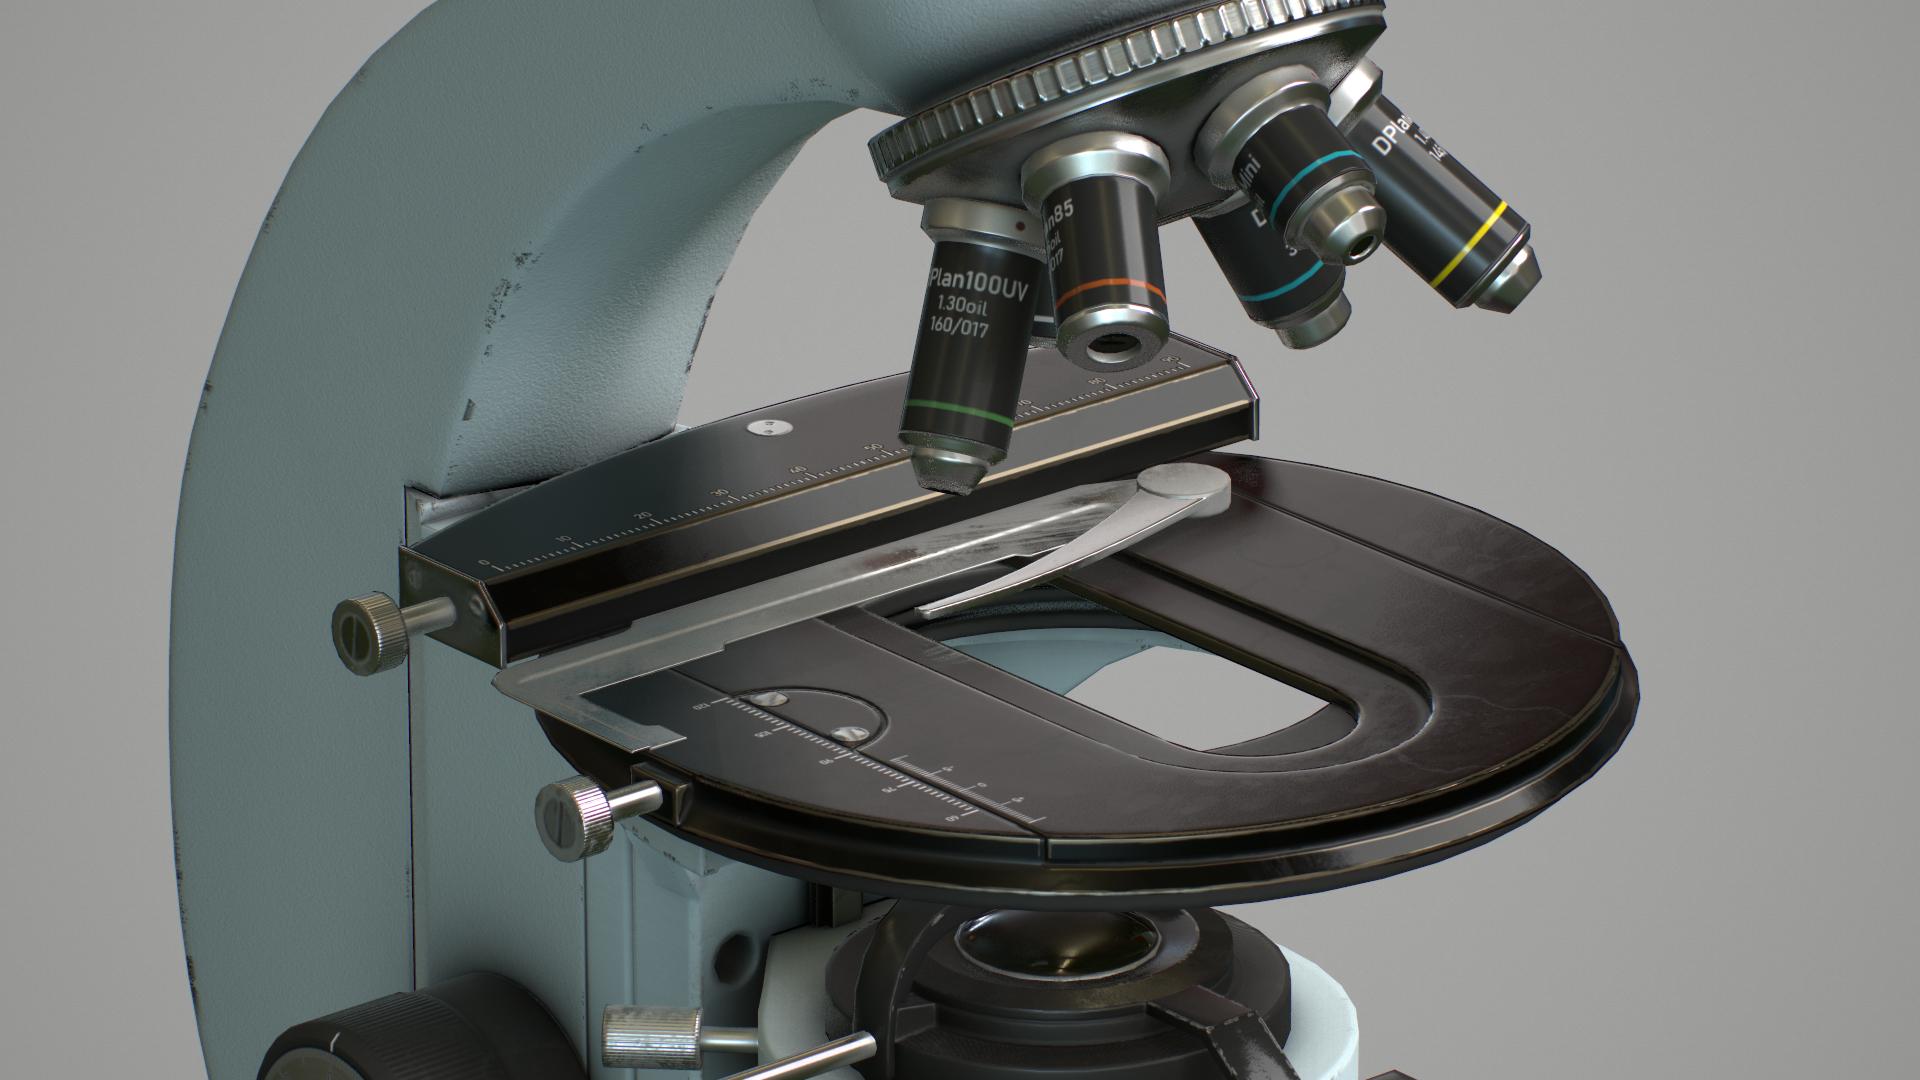 Closeup render of a zeiss microscope